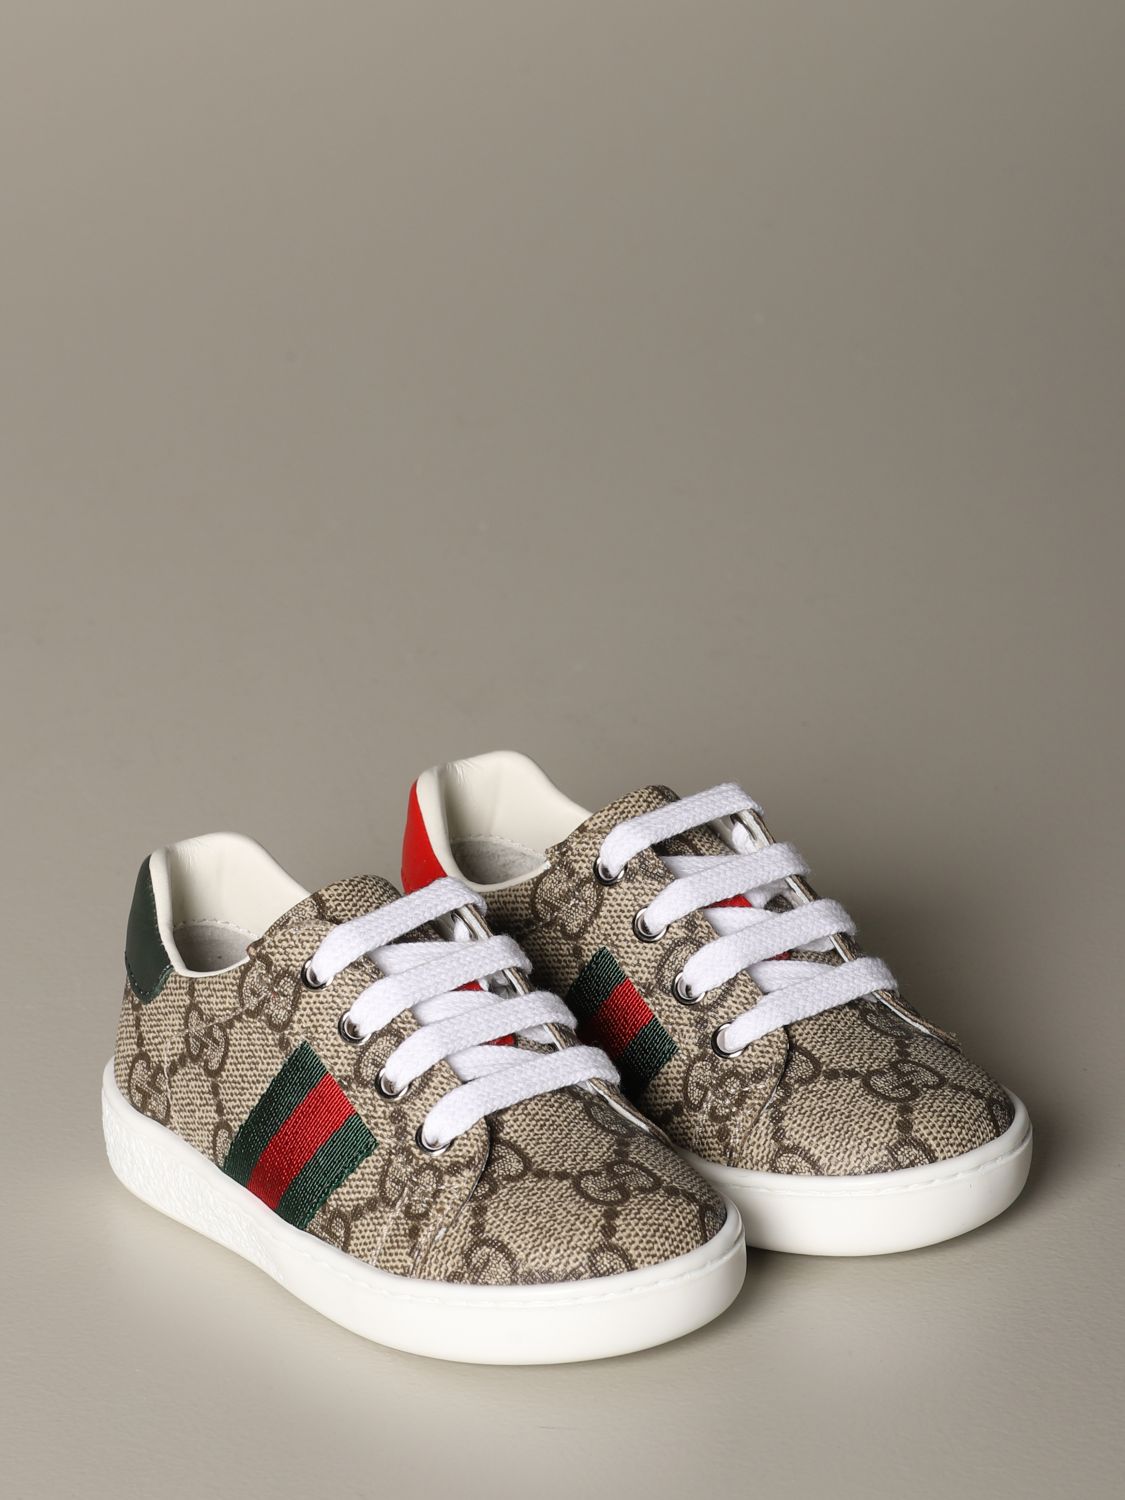 Gucci Ace sneakers with Web bands and GG Supreme print | Shoes Gucci ...